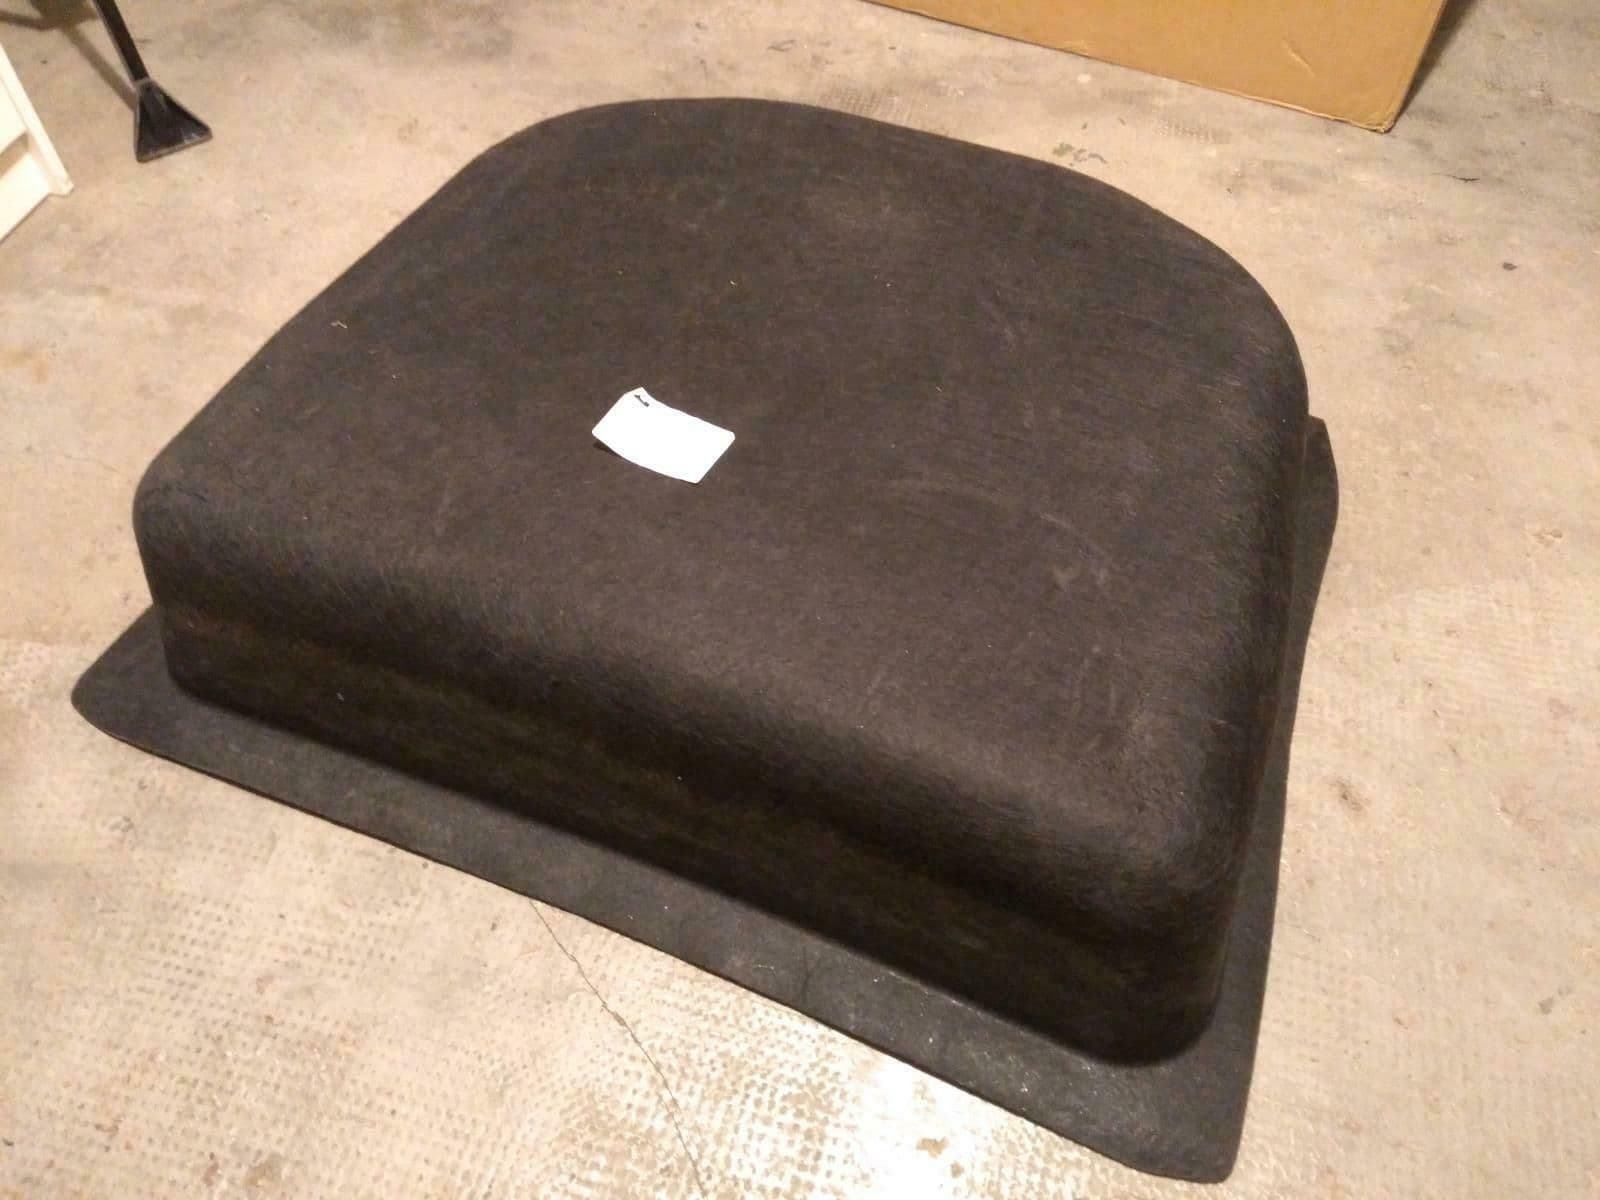 Accessories - Boot/Trunk spare wheel carpet liner - Used - Munich, Germany